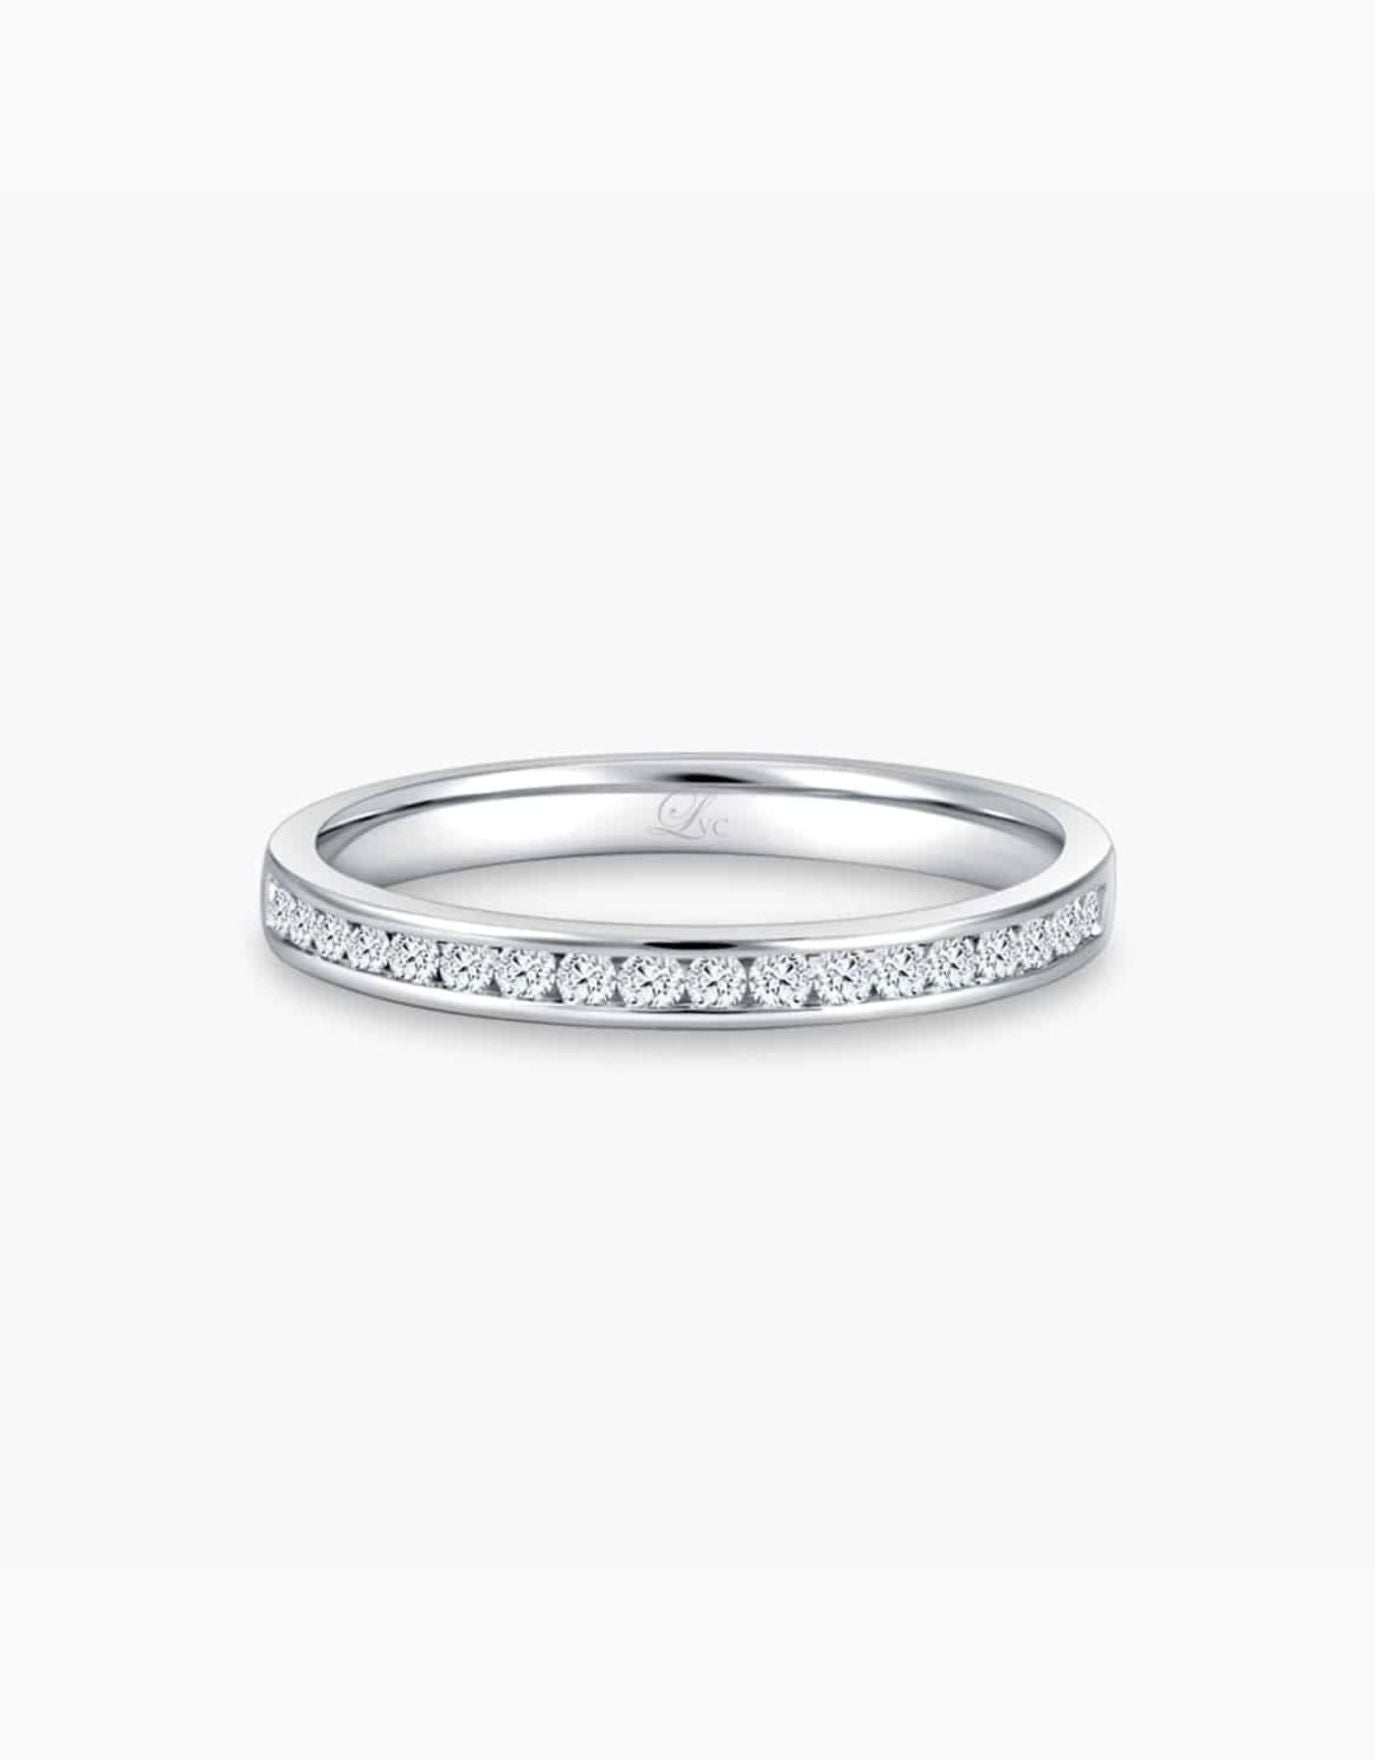 LVC Eterno Wedding Band in White Gold with Diamonds in Narrow Taper